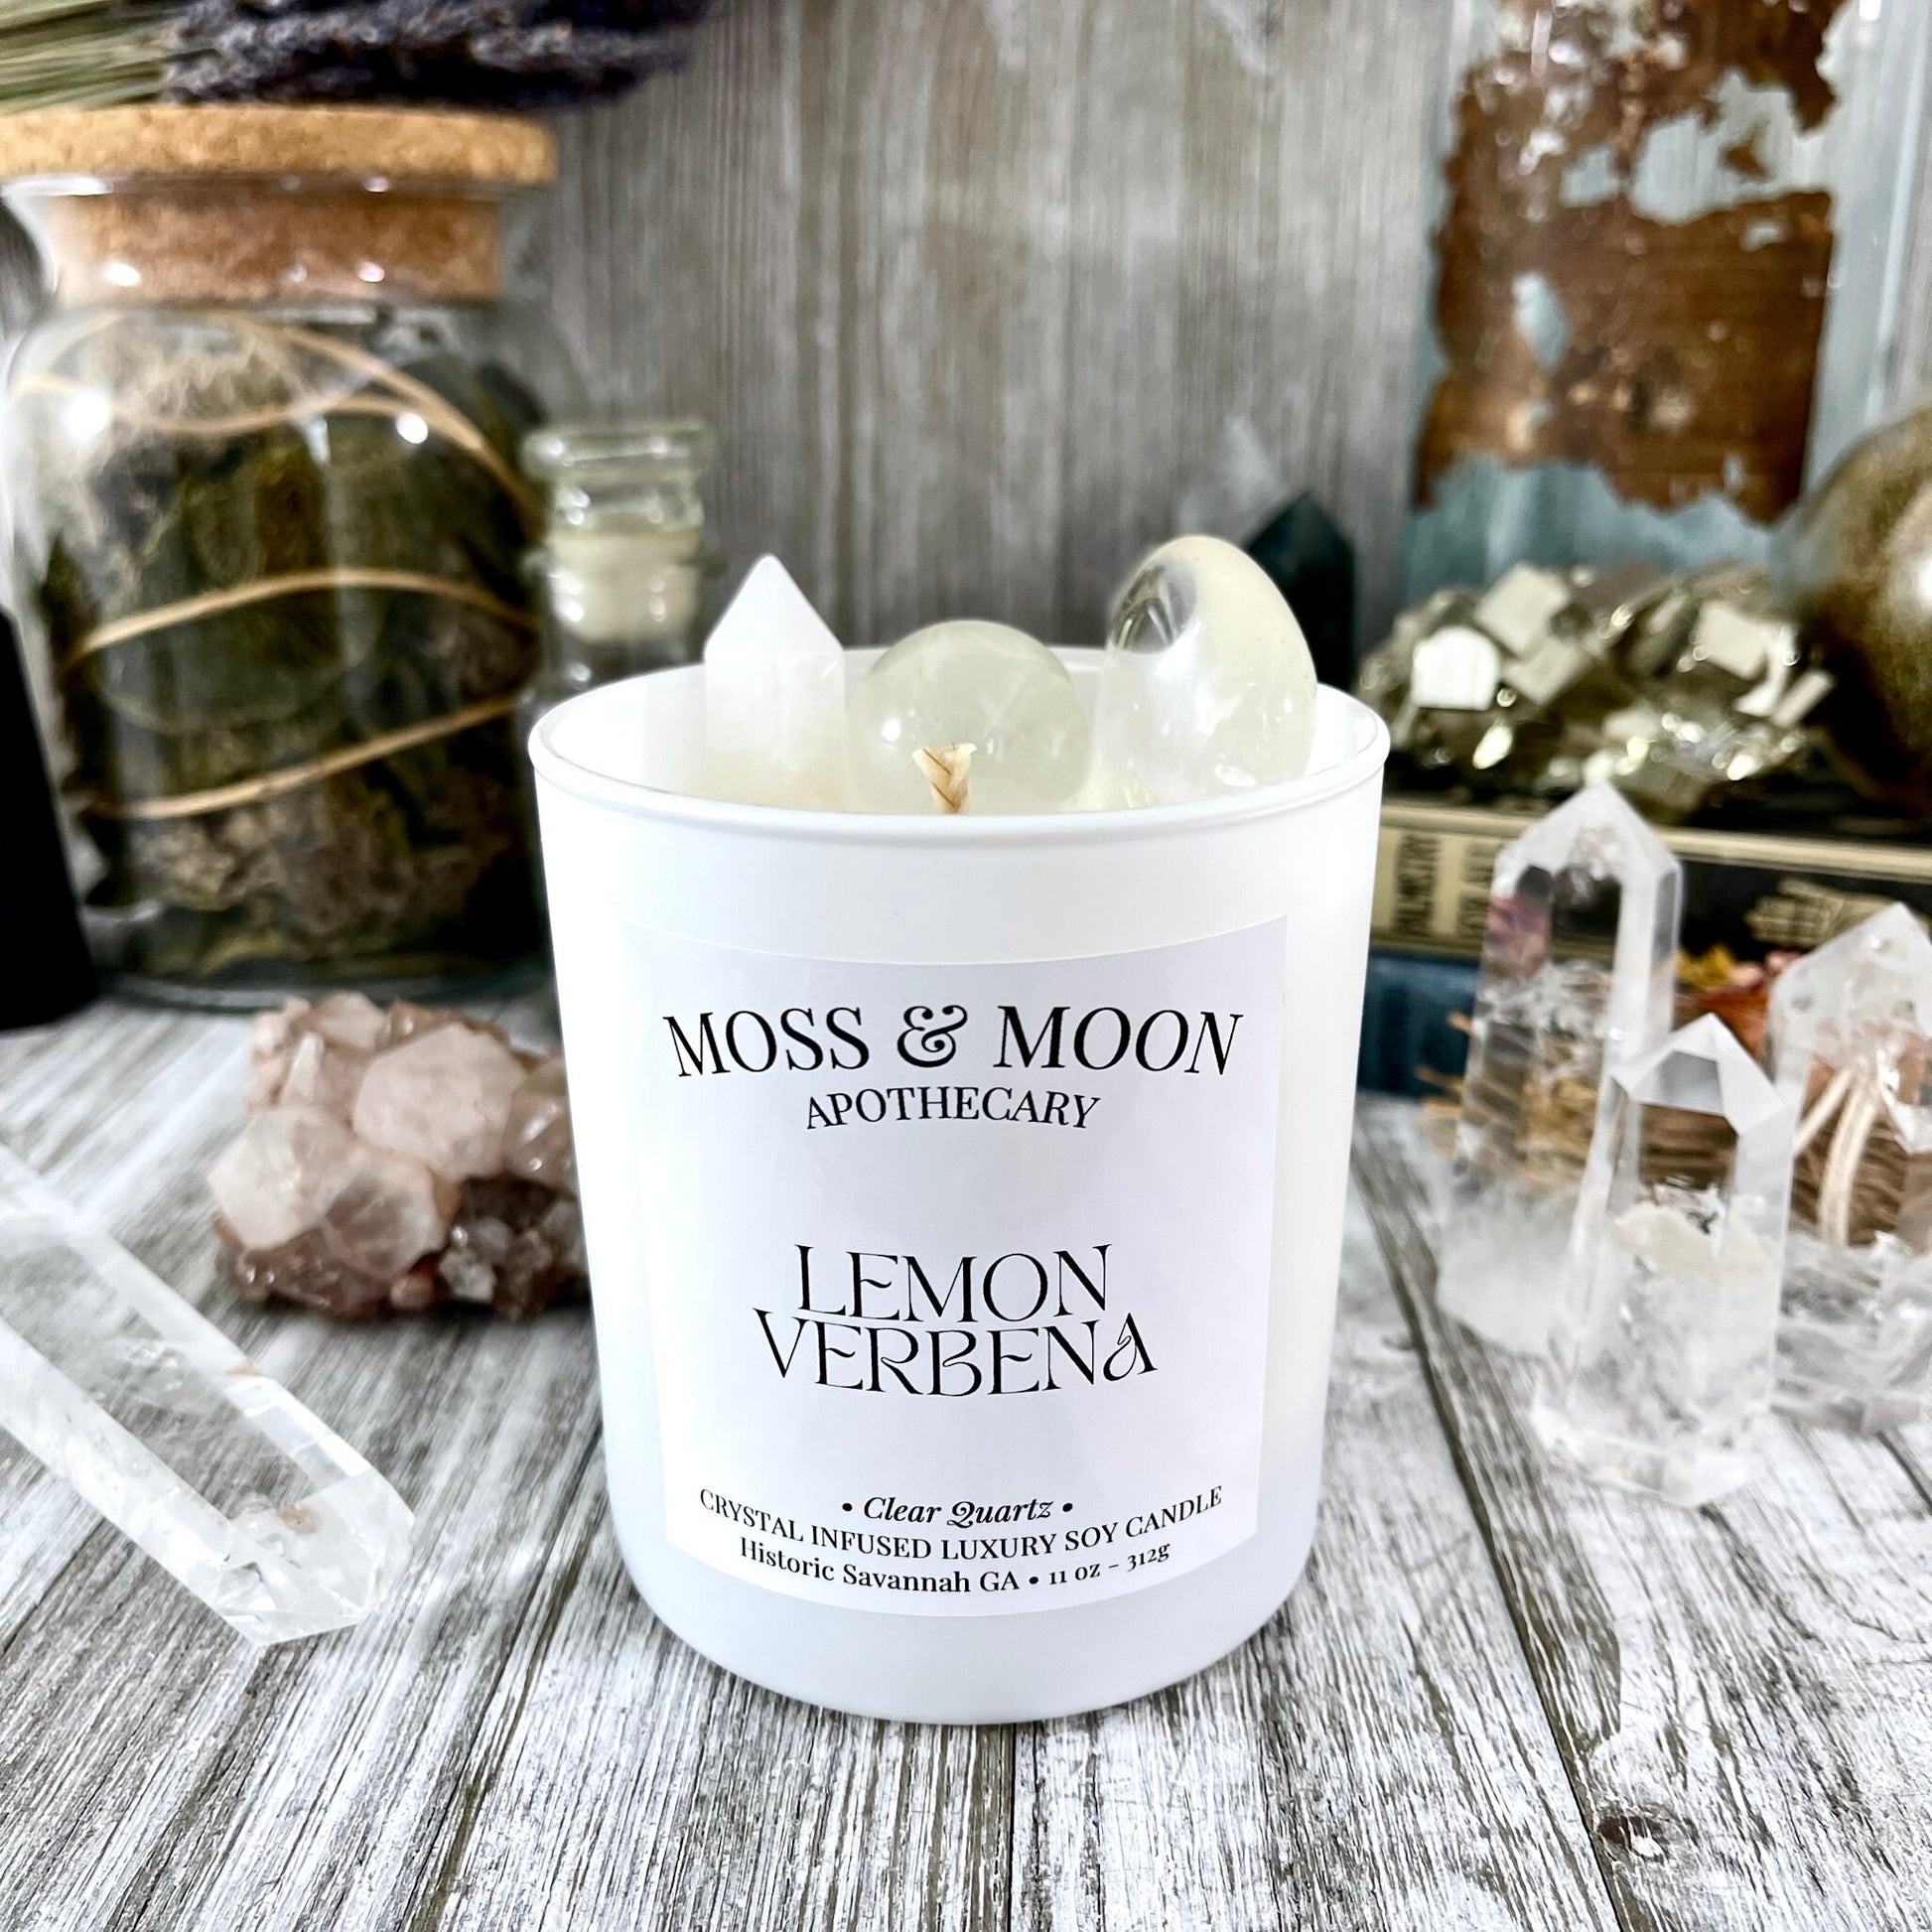 aromatherapy candle, Candles, Candles & Holders, clear quartz, Container Candles, crystal candle, Crystal Candles, crystal healing, eco-friendly candle, Etsy ID: 1480154315, handmade candle, Home & Living, Home Decor, Lemon Scented Candle, lemon verbena c